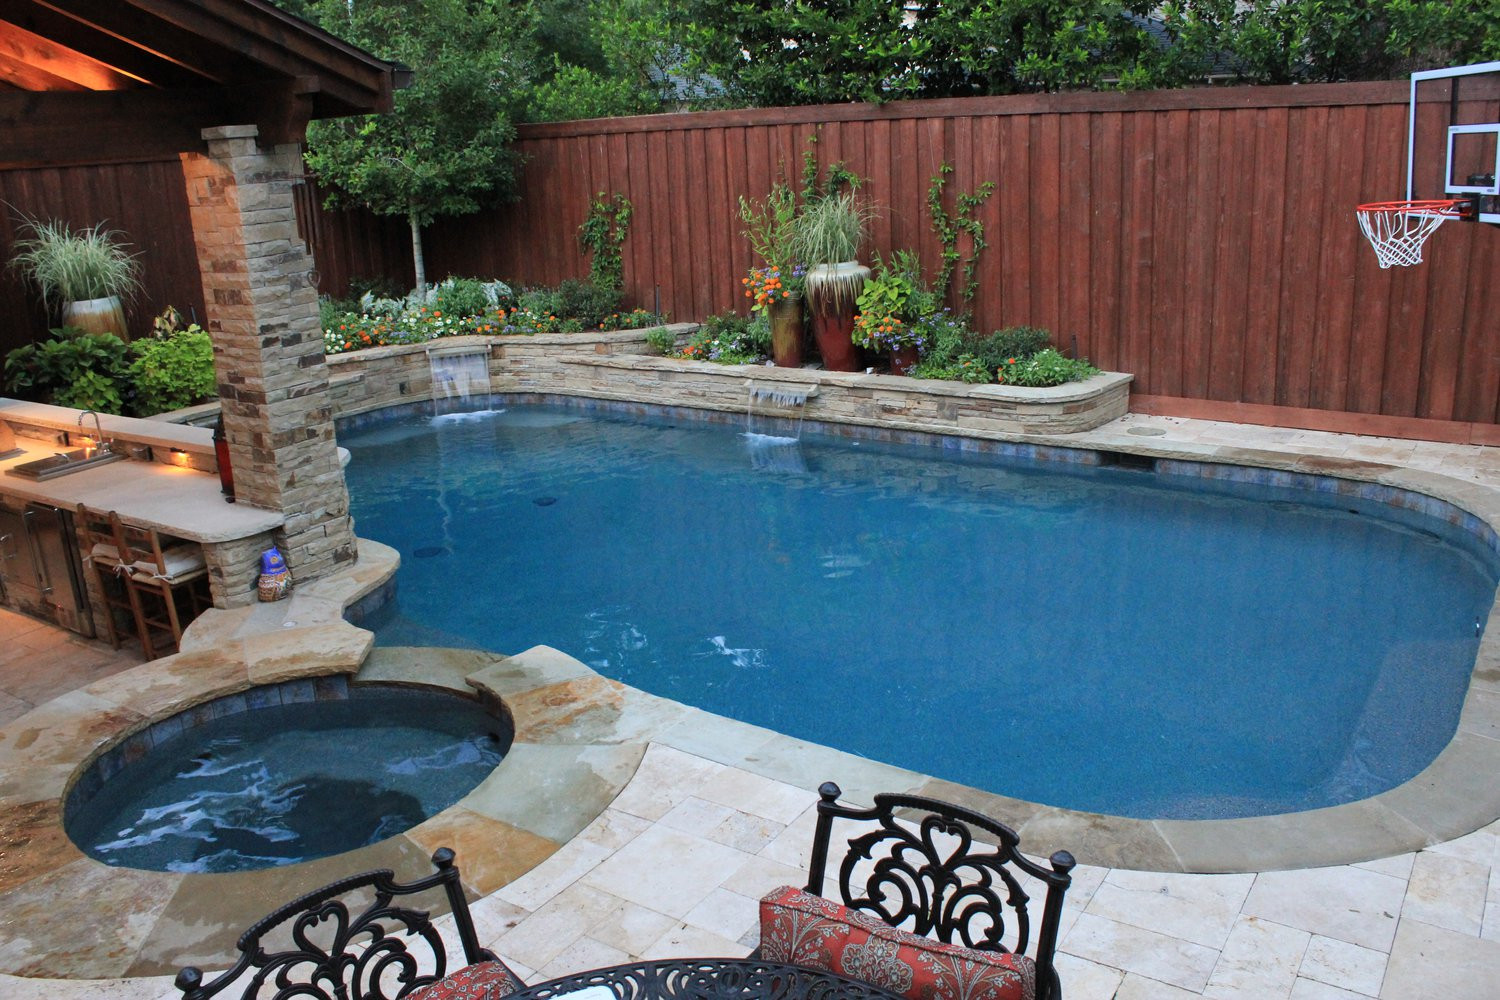 Best ideas about Backyard Swimming Pool . Save or Pin Dallas TX Custom Pool Designers and Builders Now.